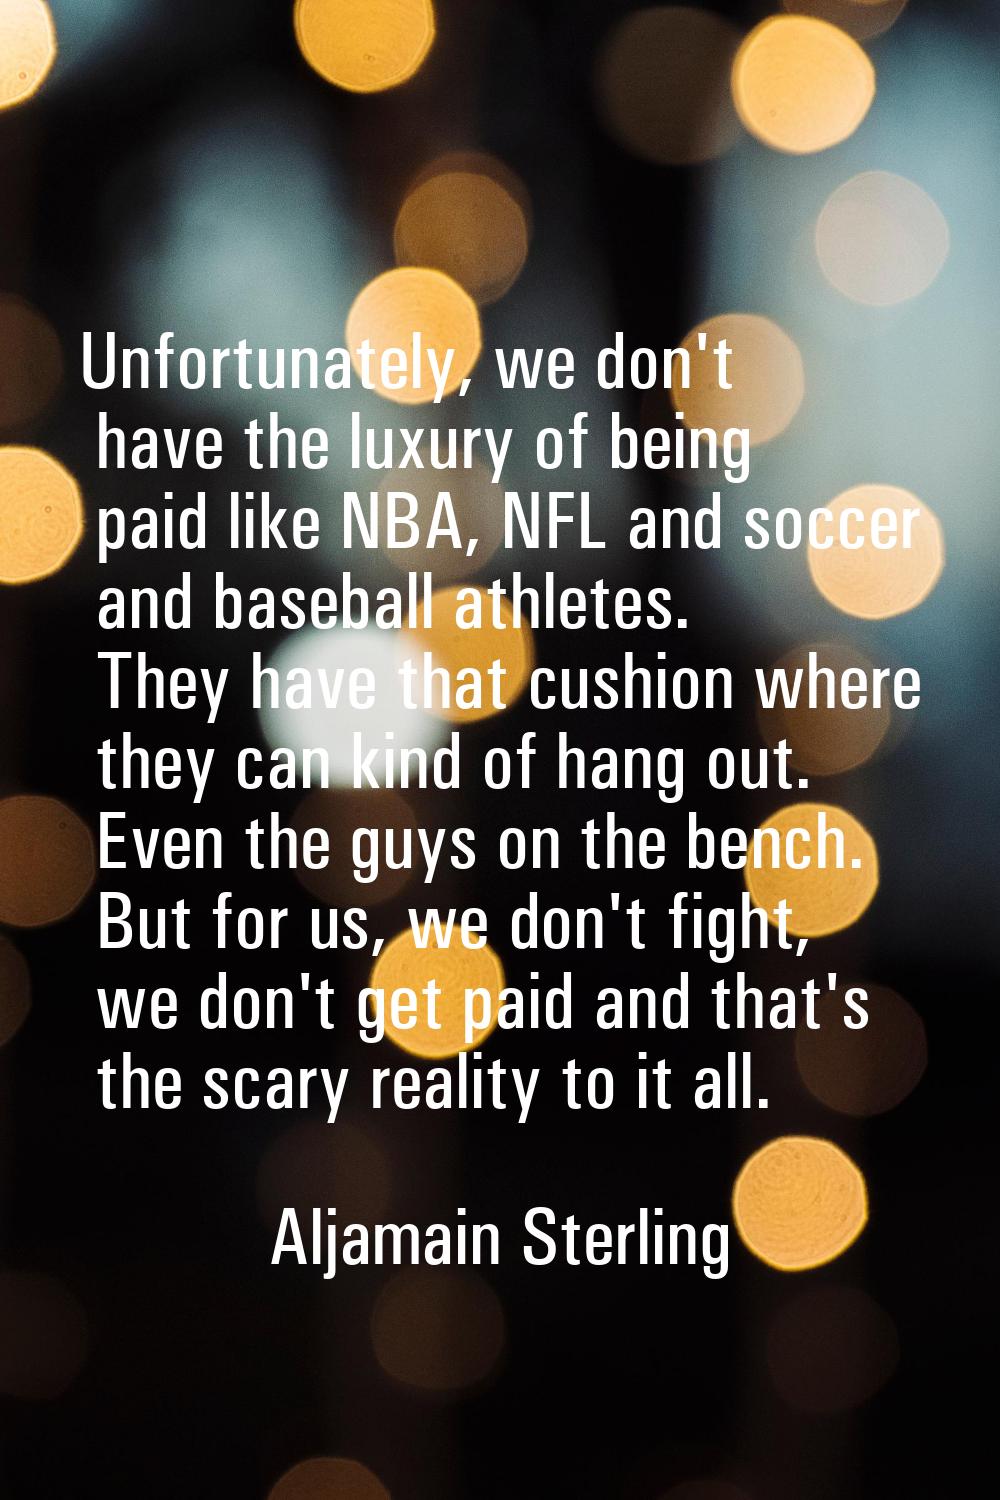 Unfortunately, we don't have the luxury of being paid like NBA, NFL and soccer and baseball athlete